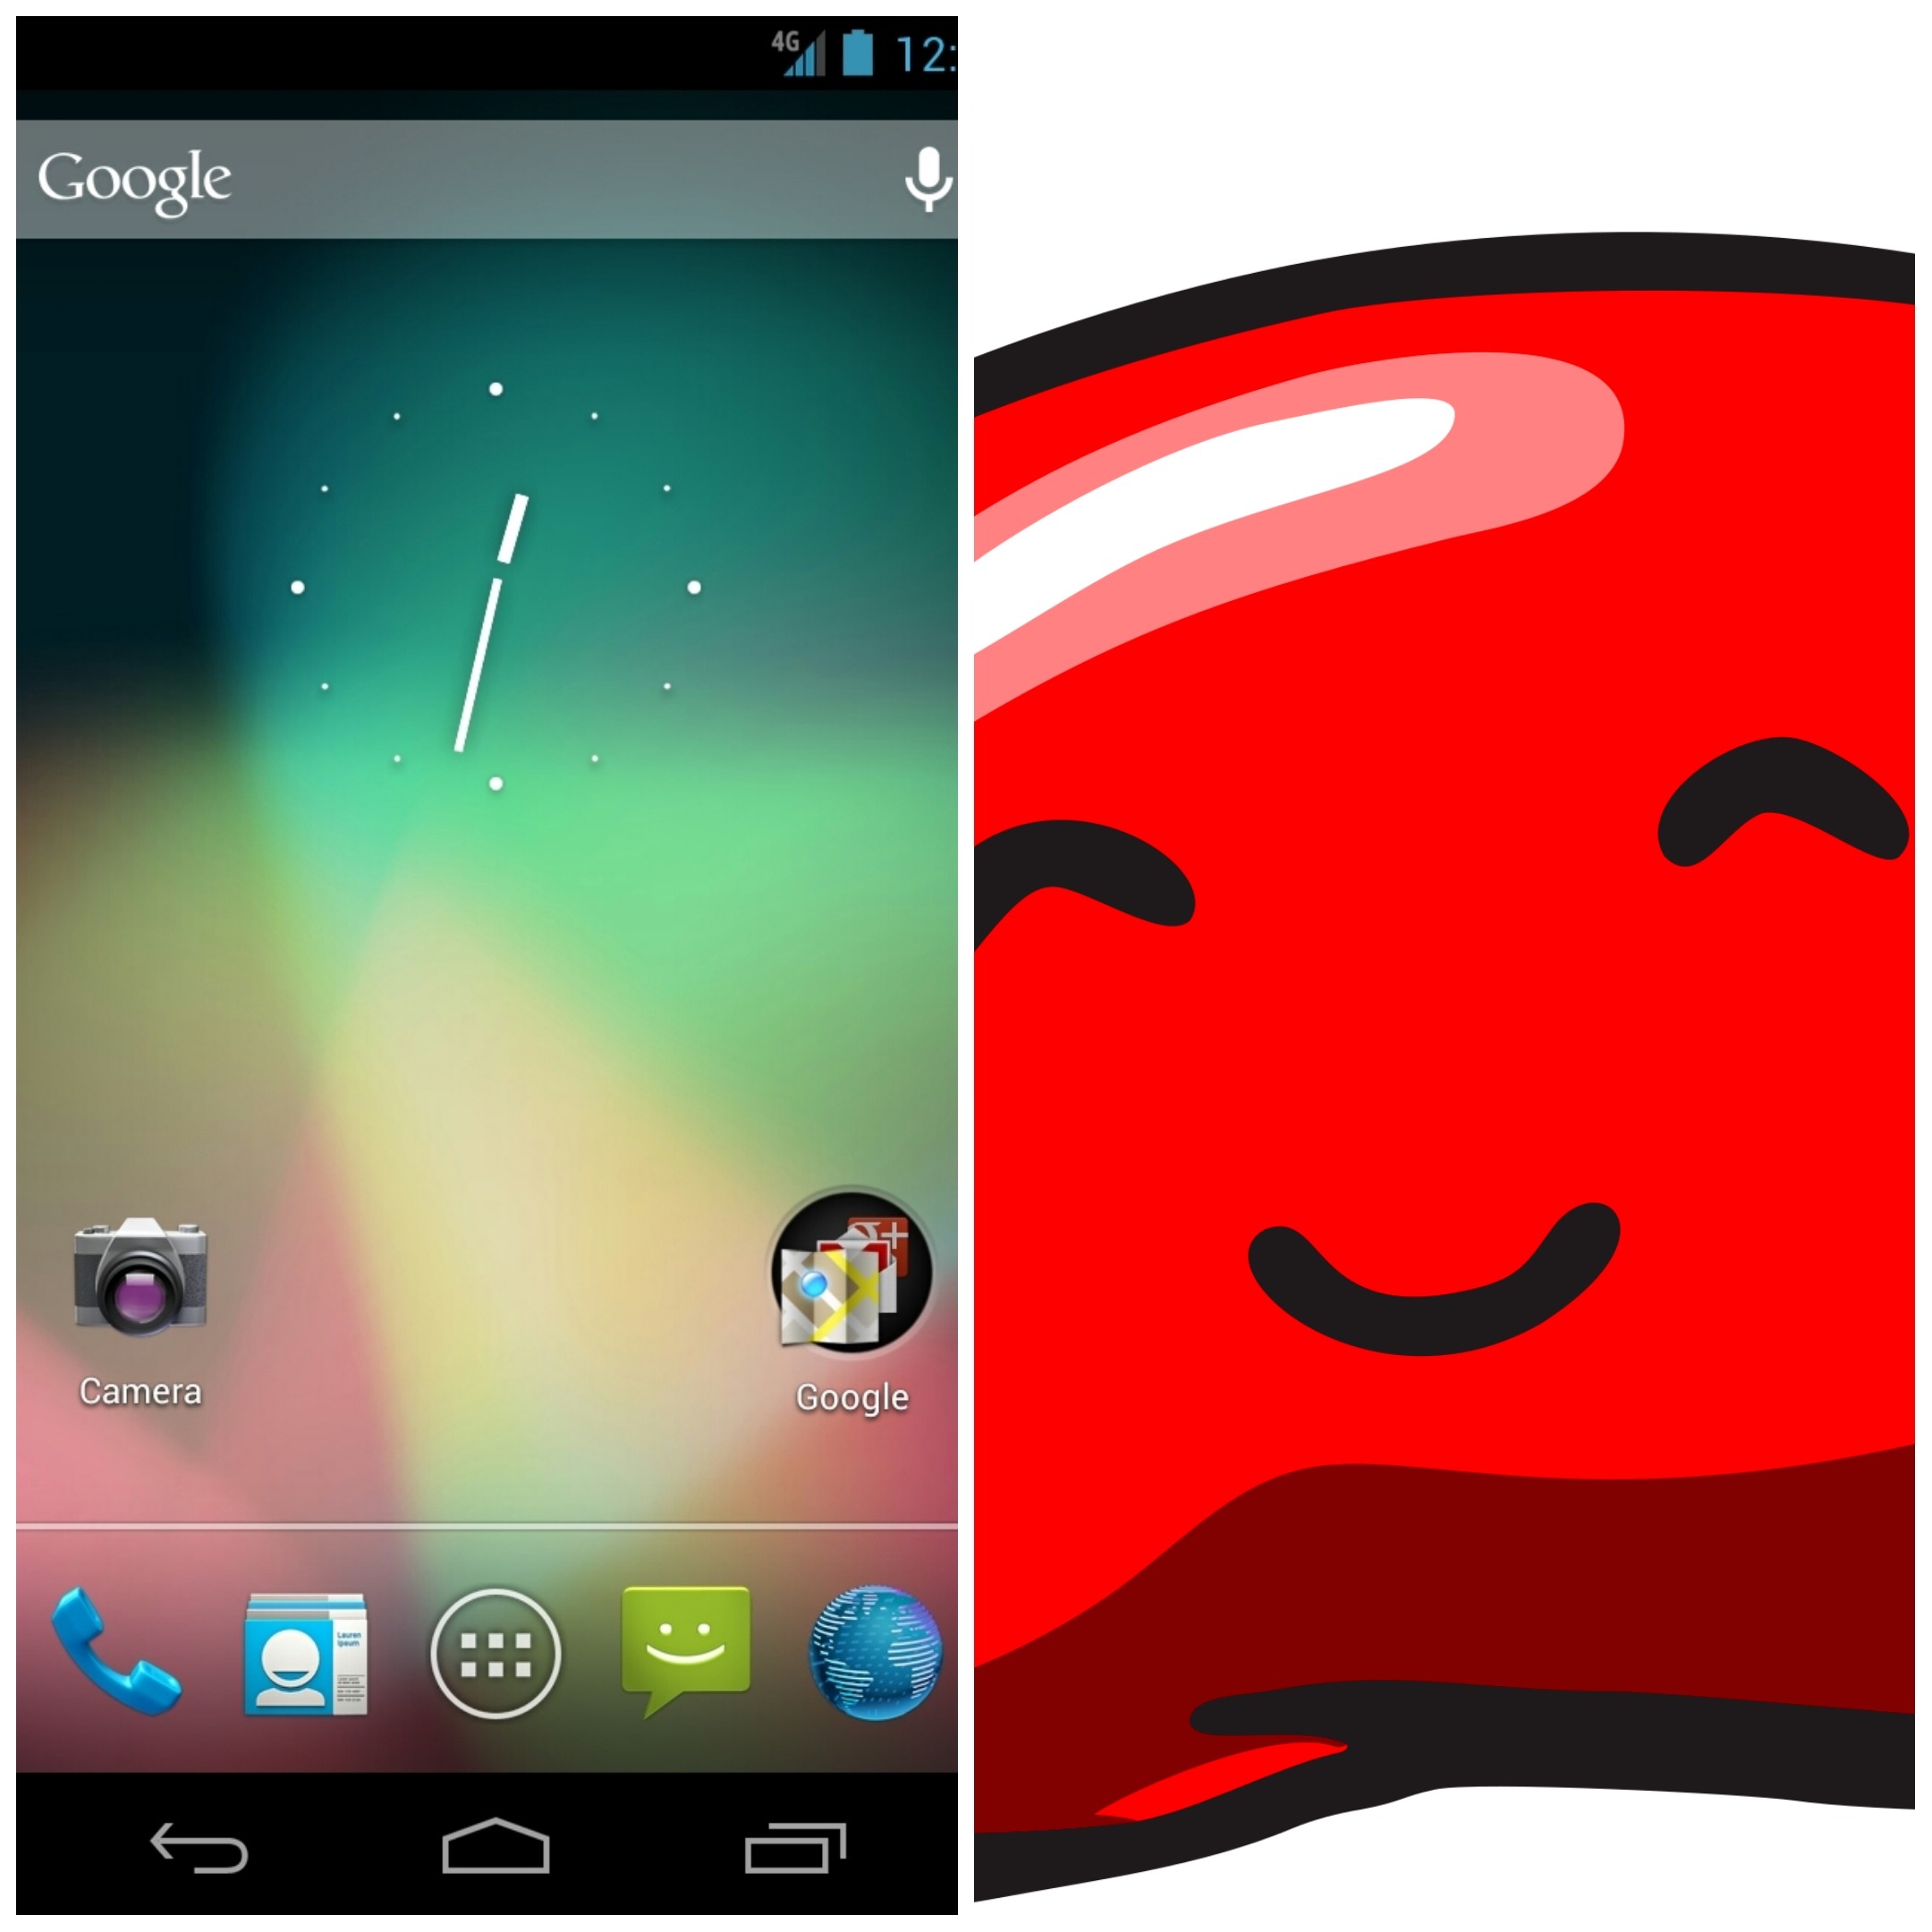 The history of Android Jellybean